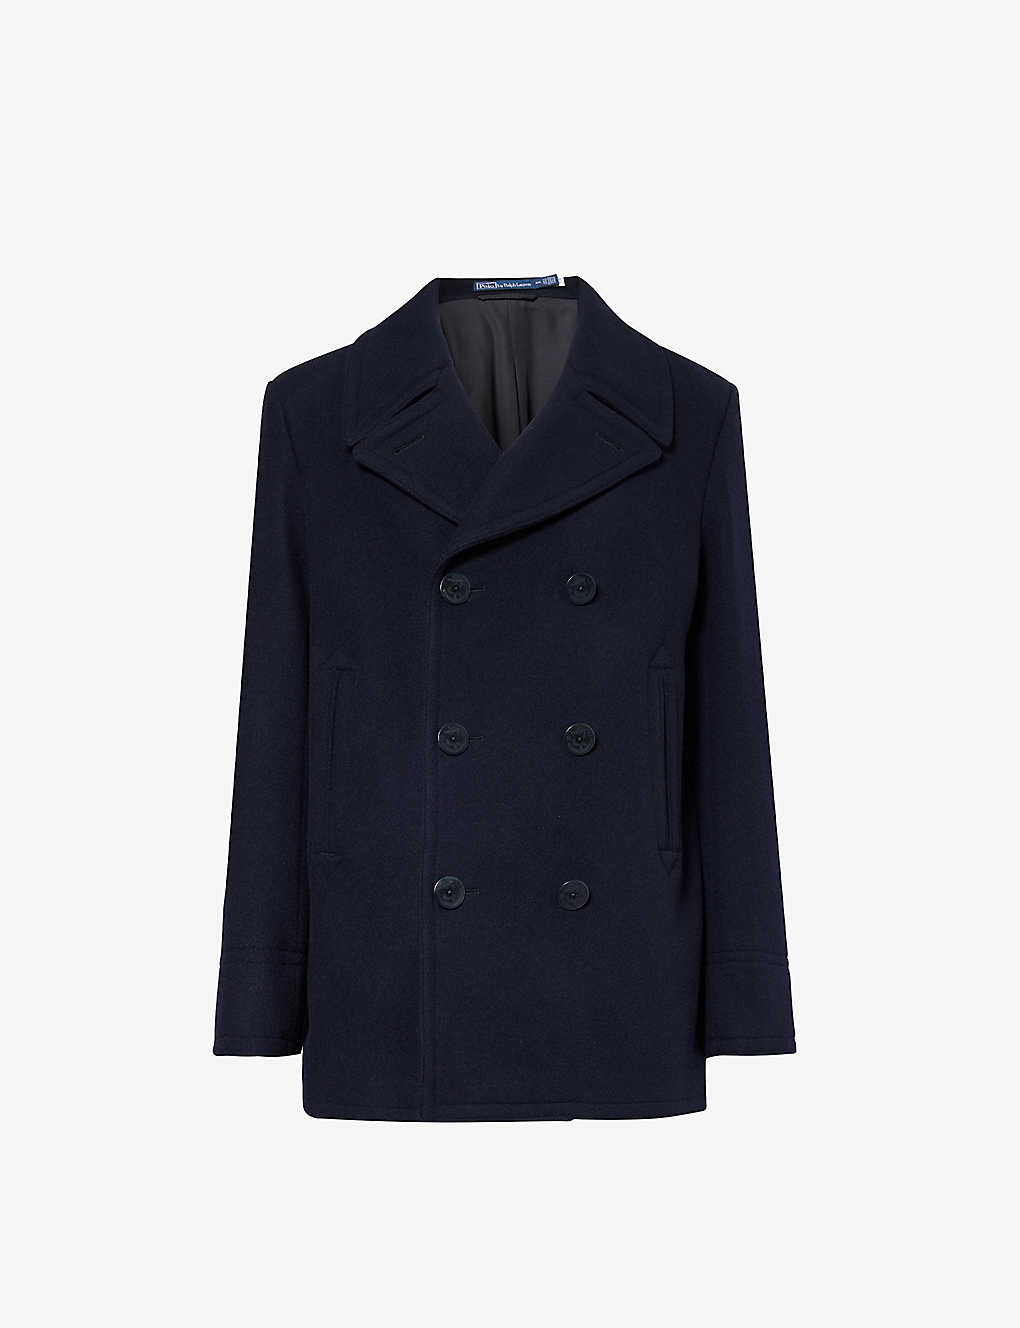 Polo Ralph Lauren Mens Navy Single-breasted Notched-lapel Wool-blend Coat